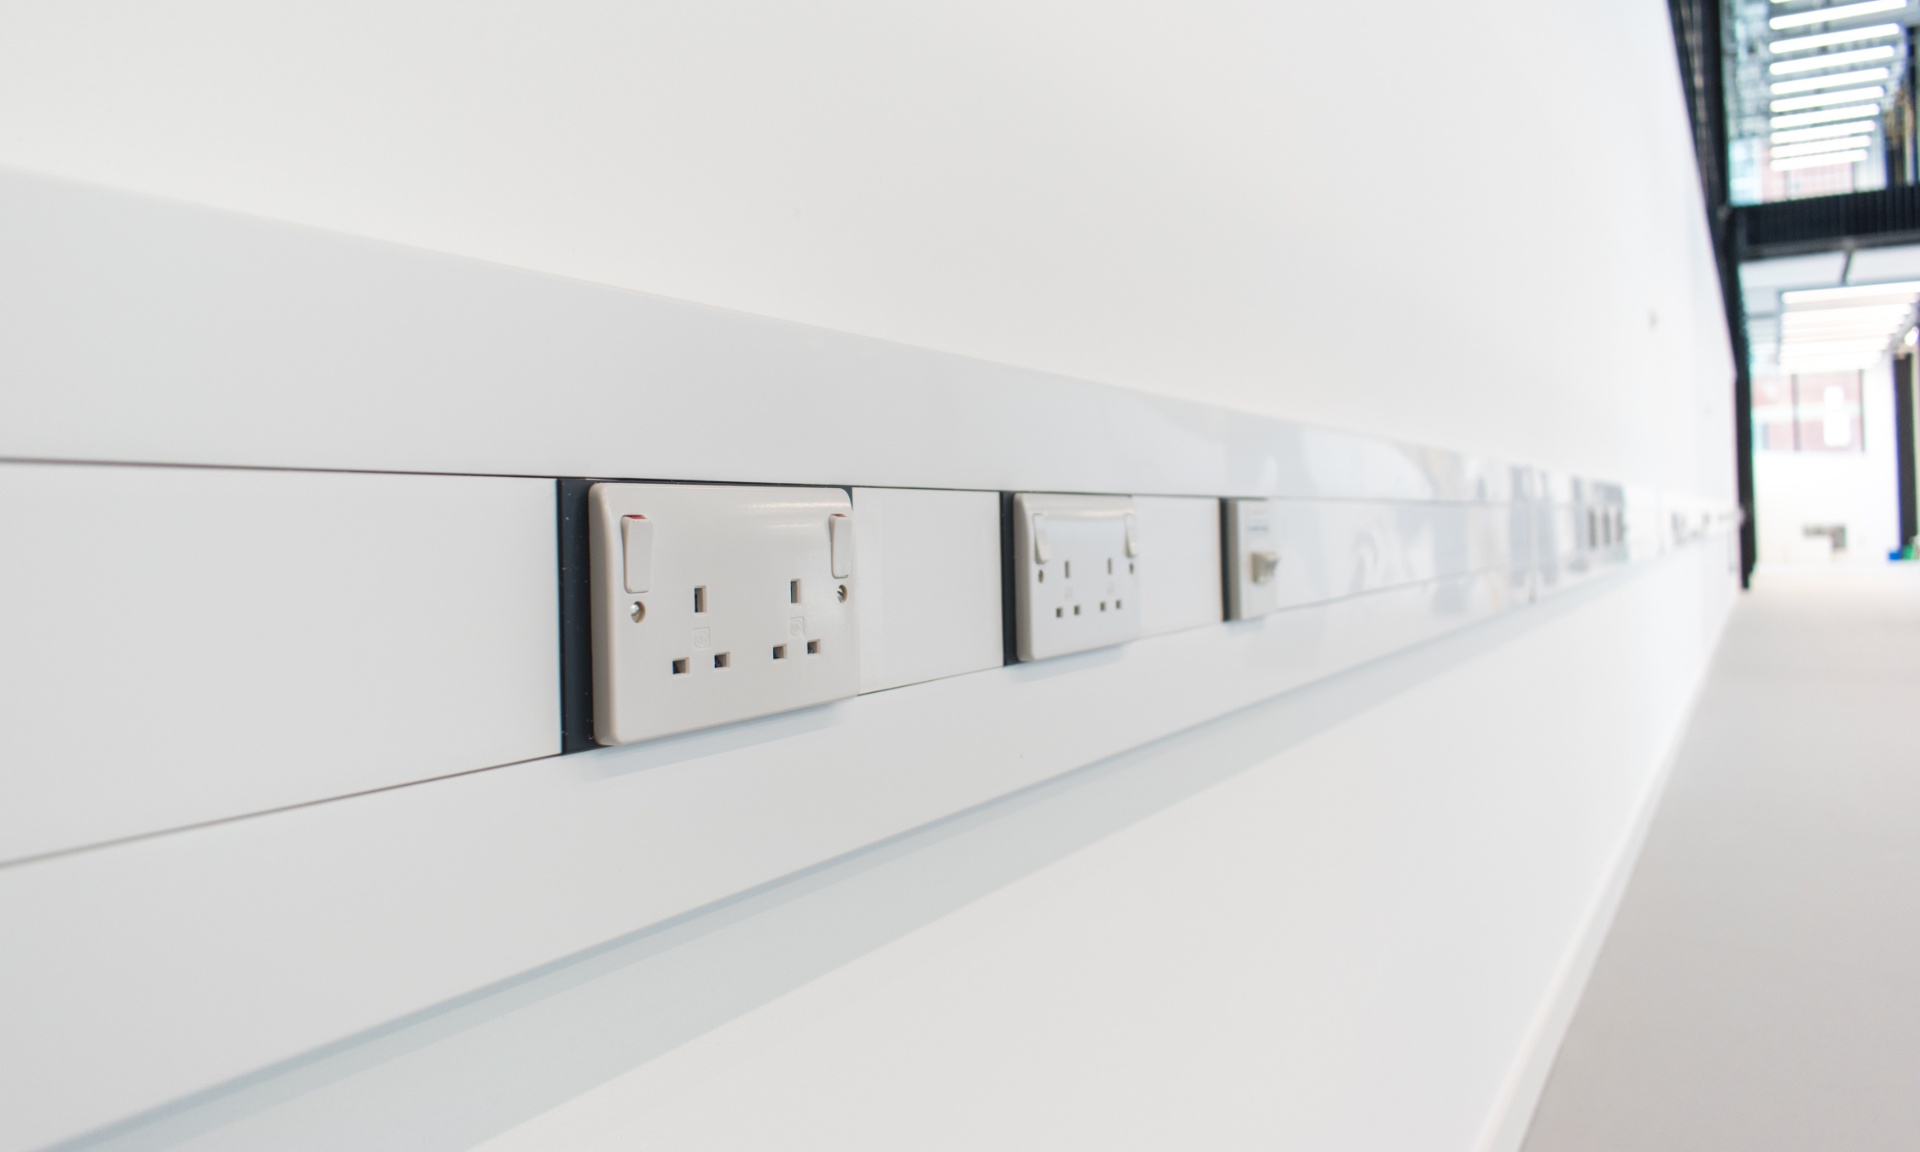 Marshall-Tufflex provides cable management solution for new engineering innovation centre 